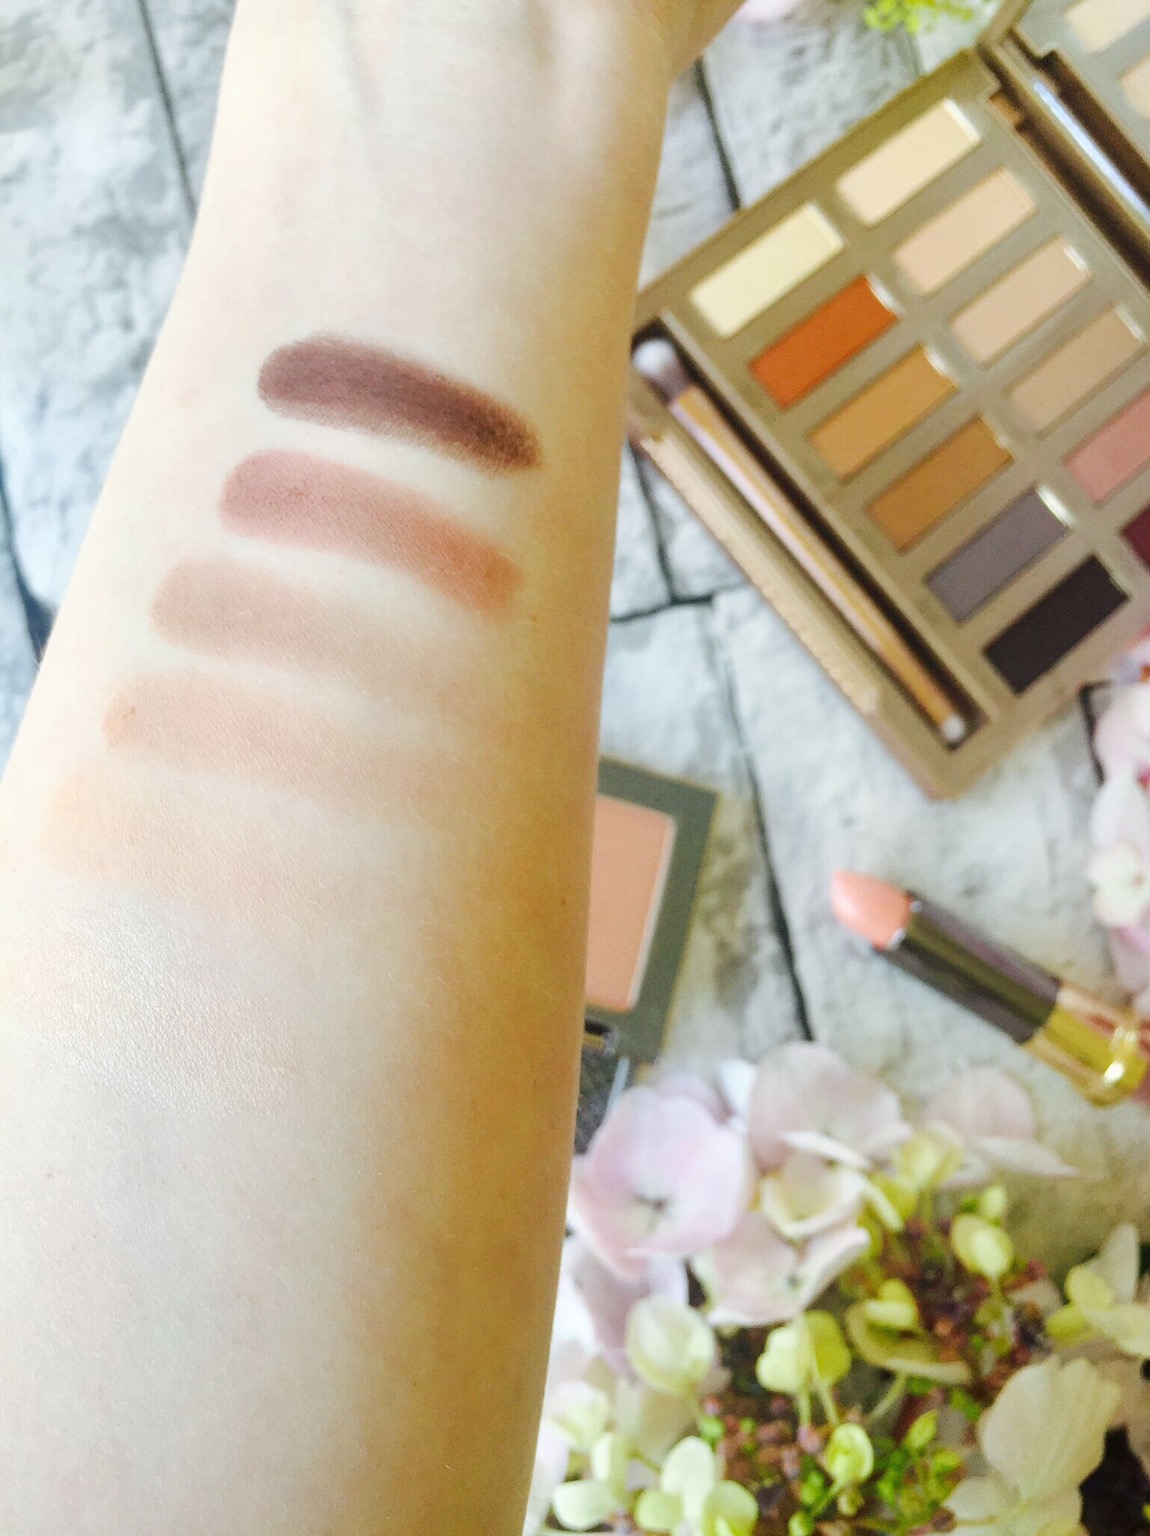 Urban Decay Naked Ultimate Basics Eyeshadow Palette and swatches